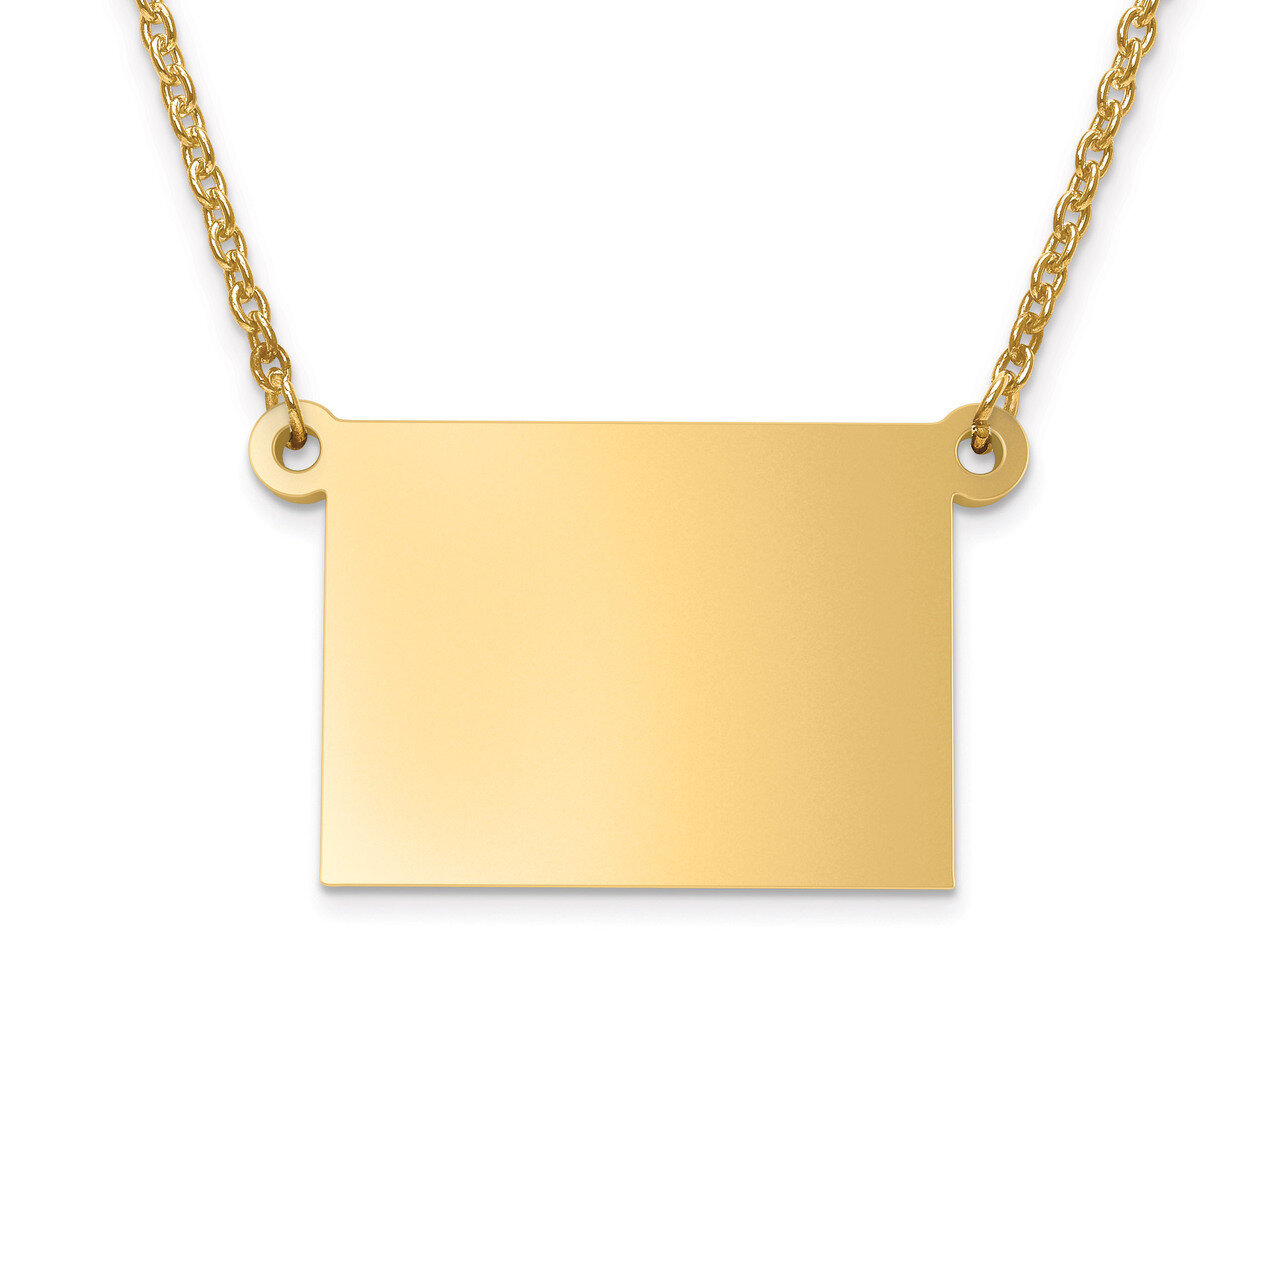 Wyoming State Pendant with Chain Engravable Gold-plated on Sterling Silver